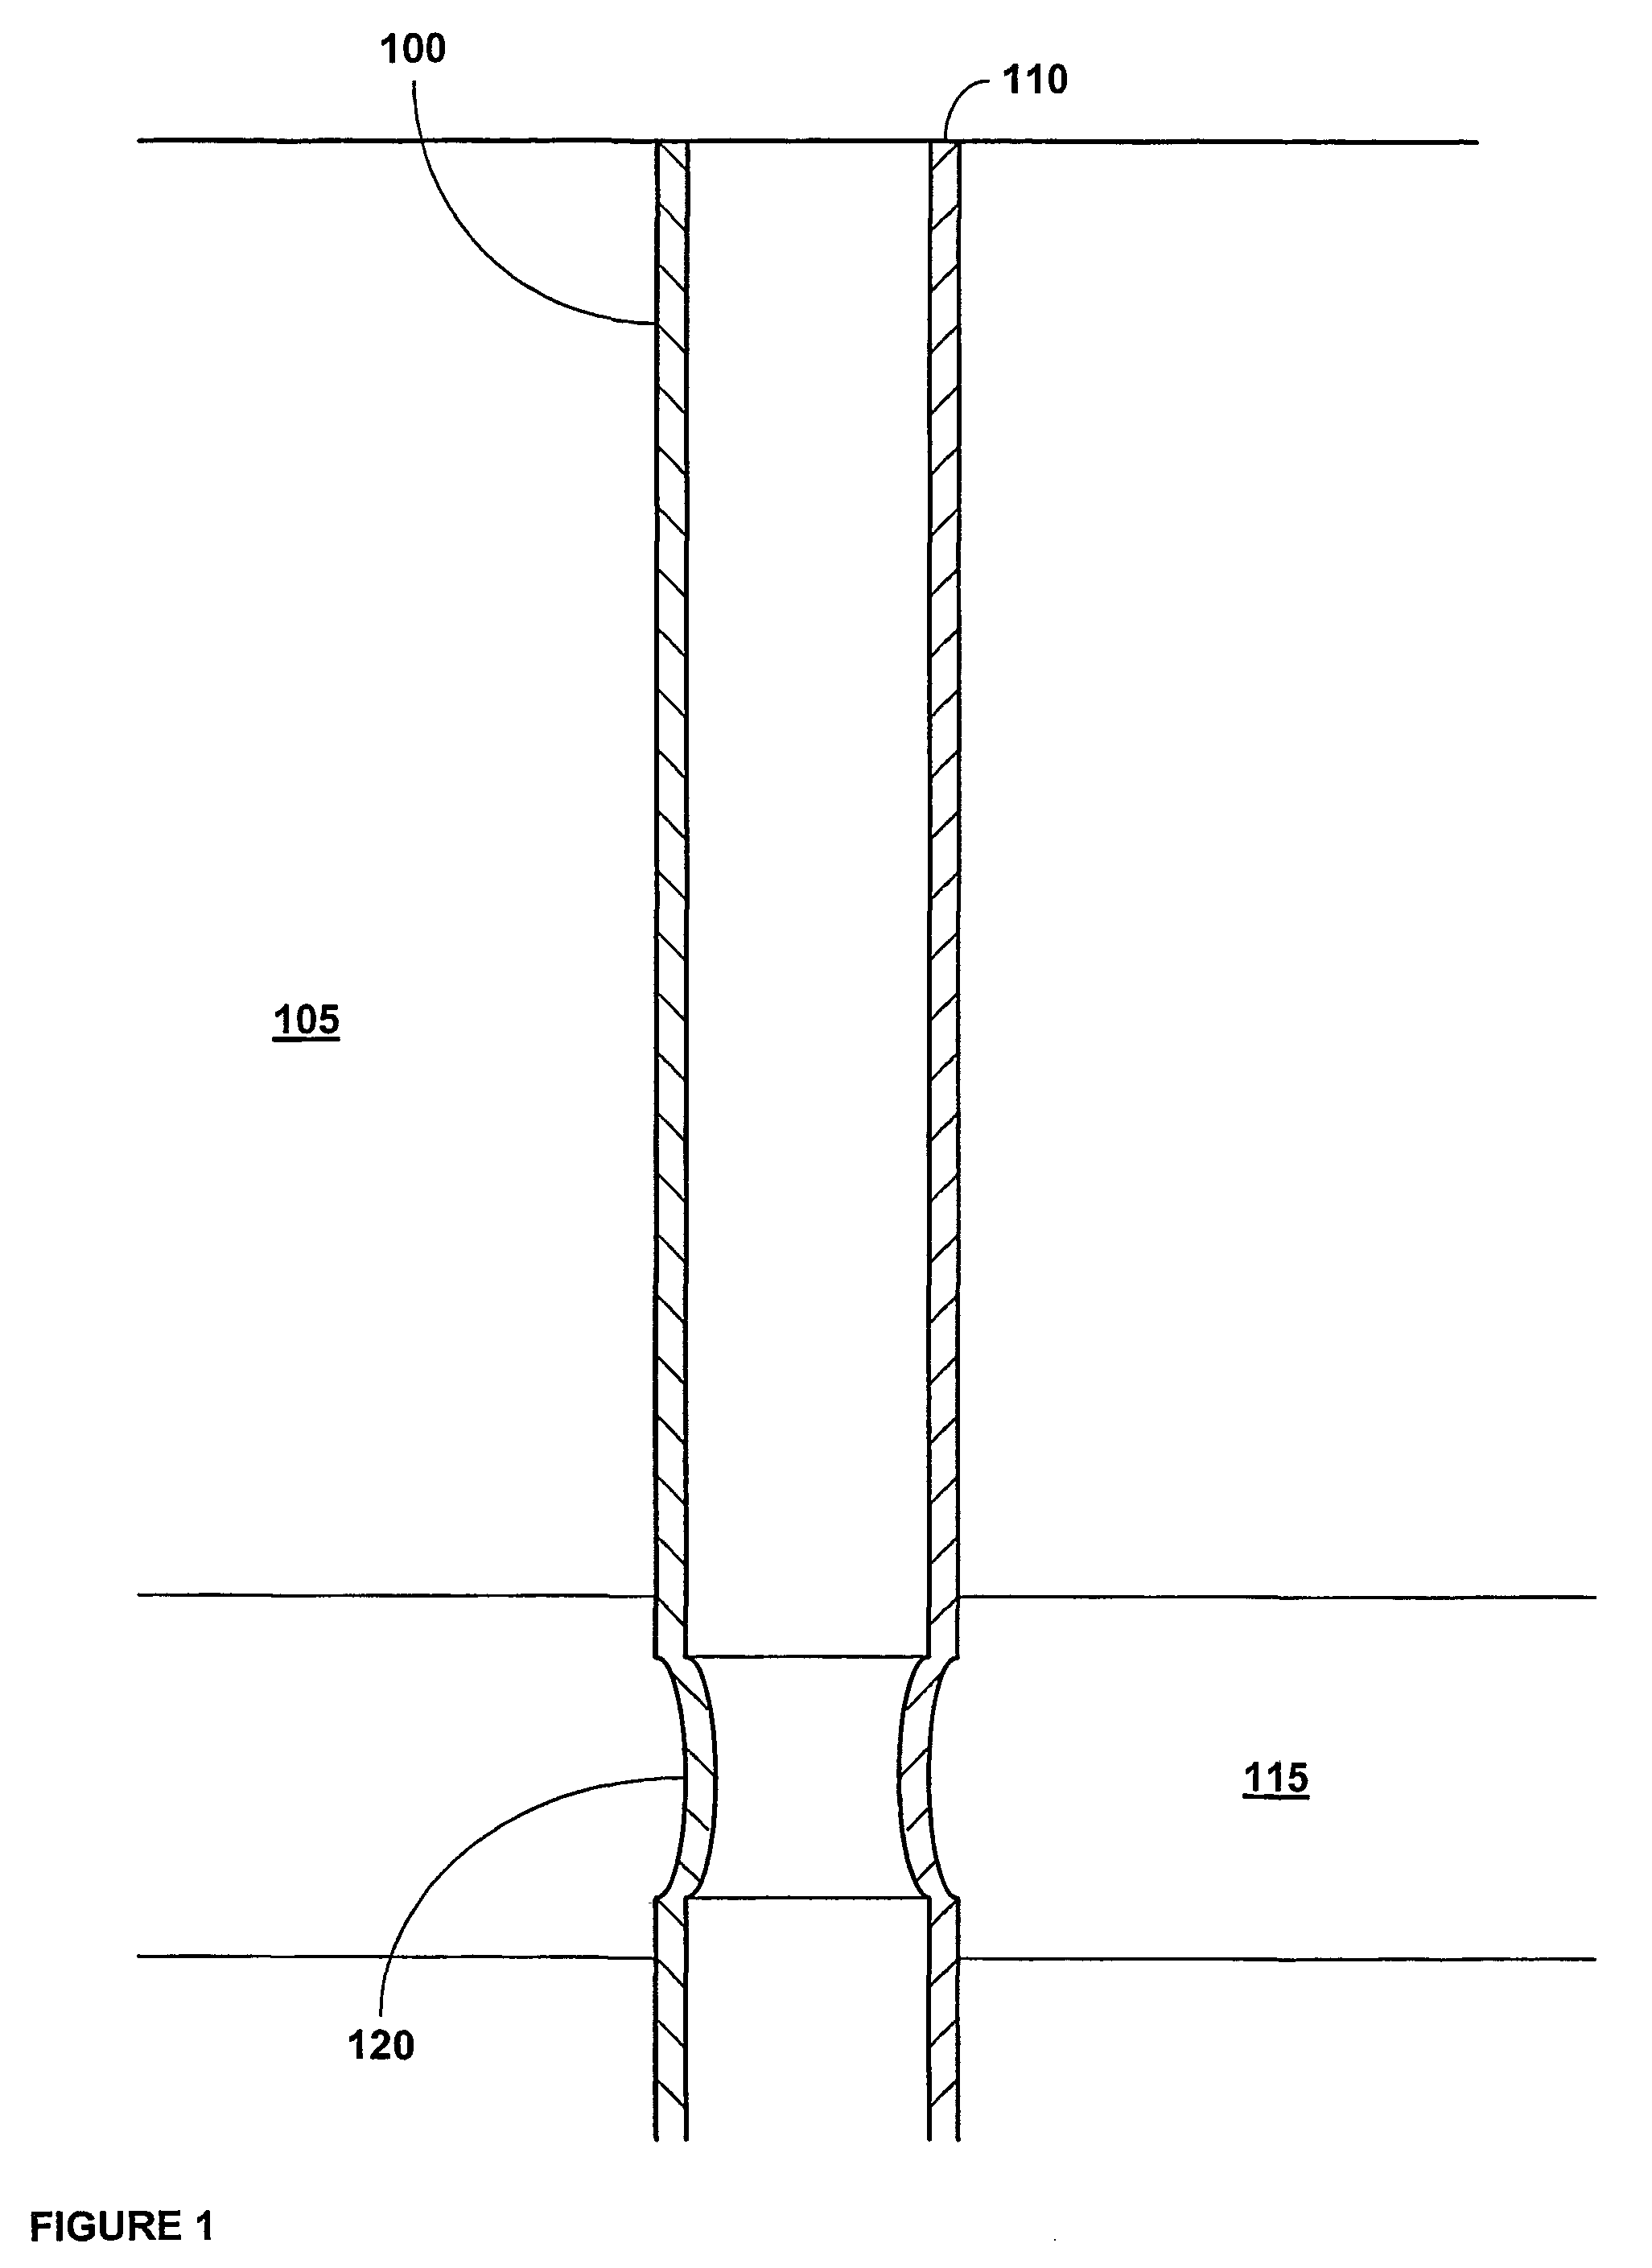 Liner hanger with slip joint sealing members and method of use